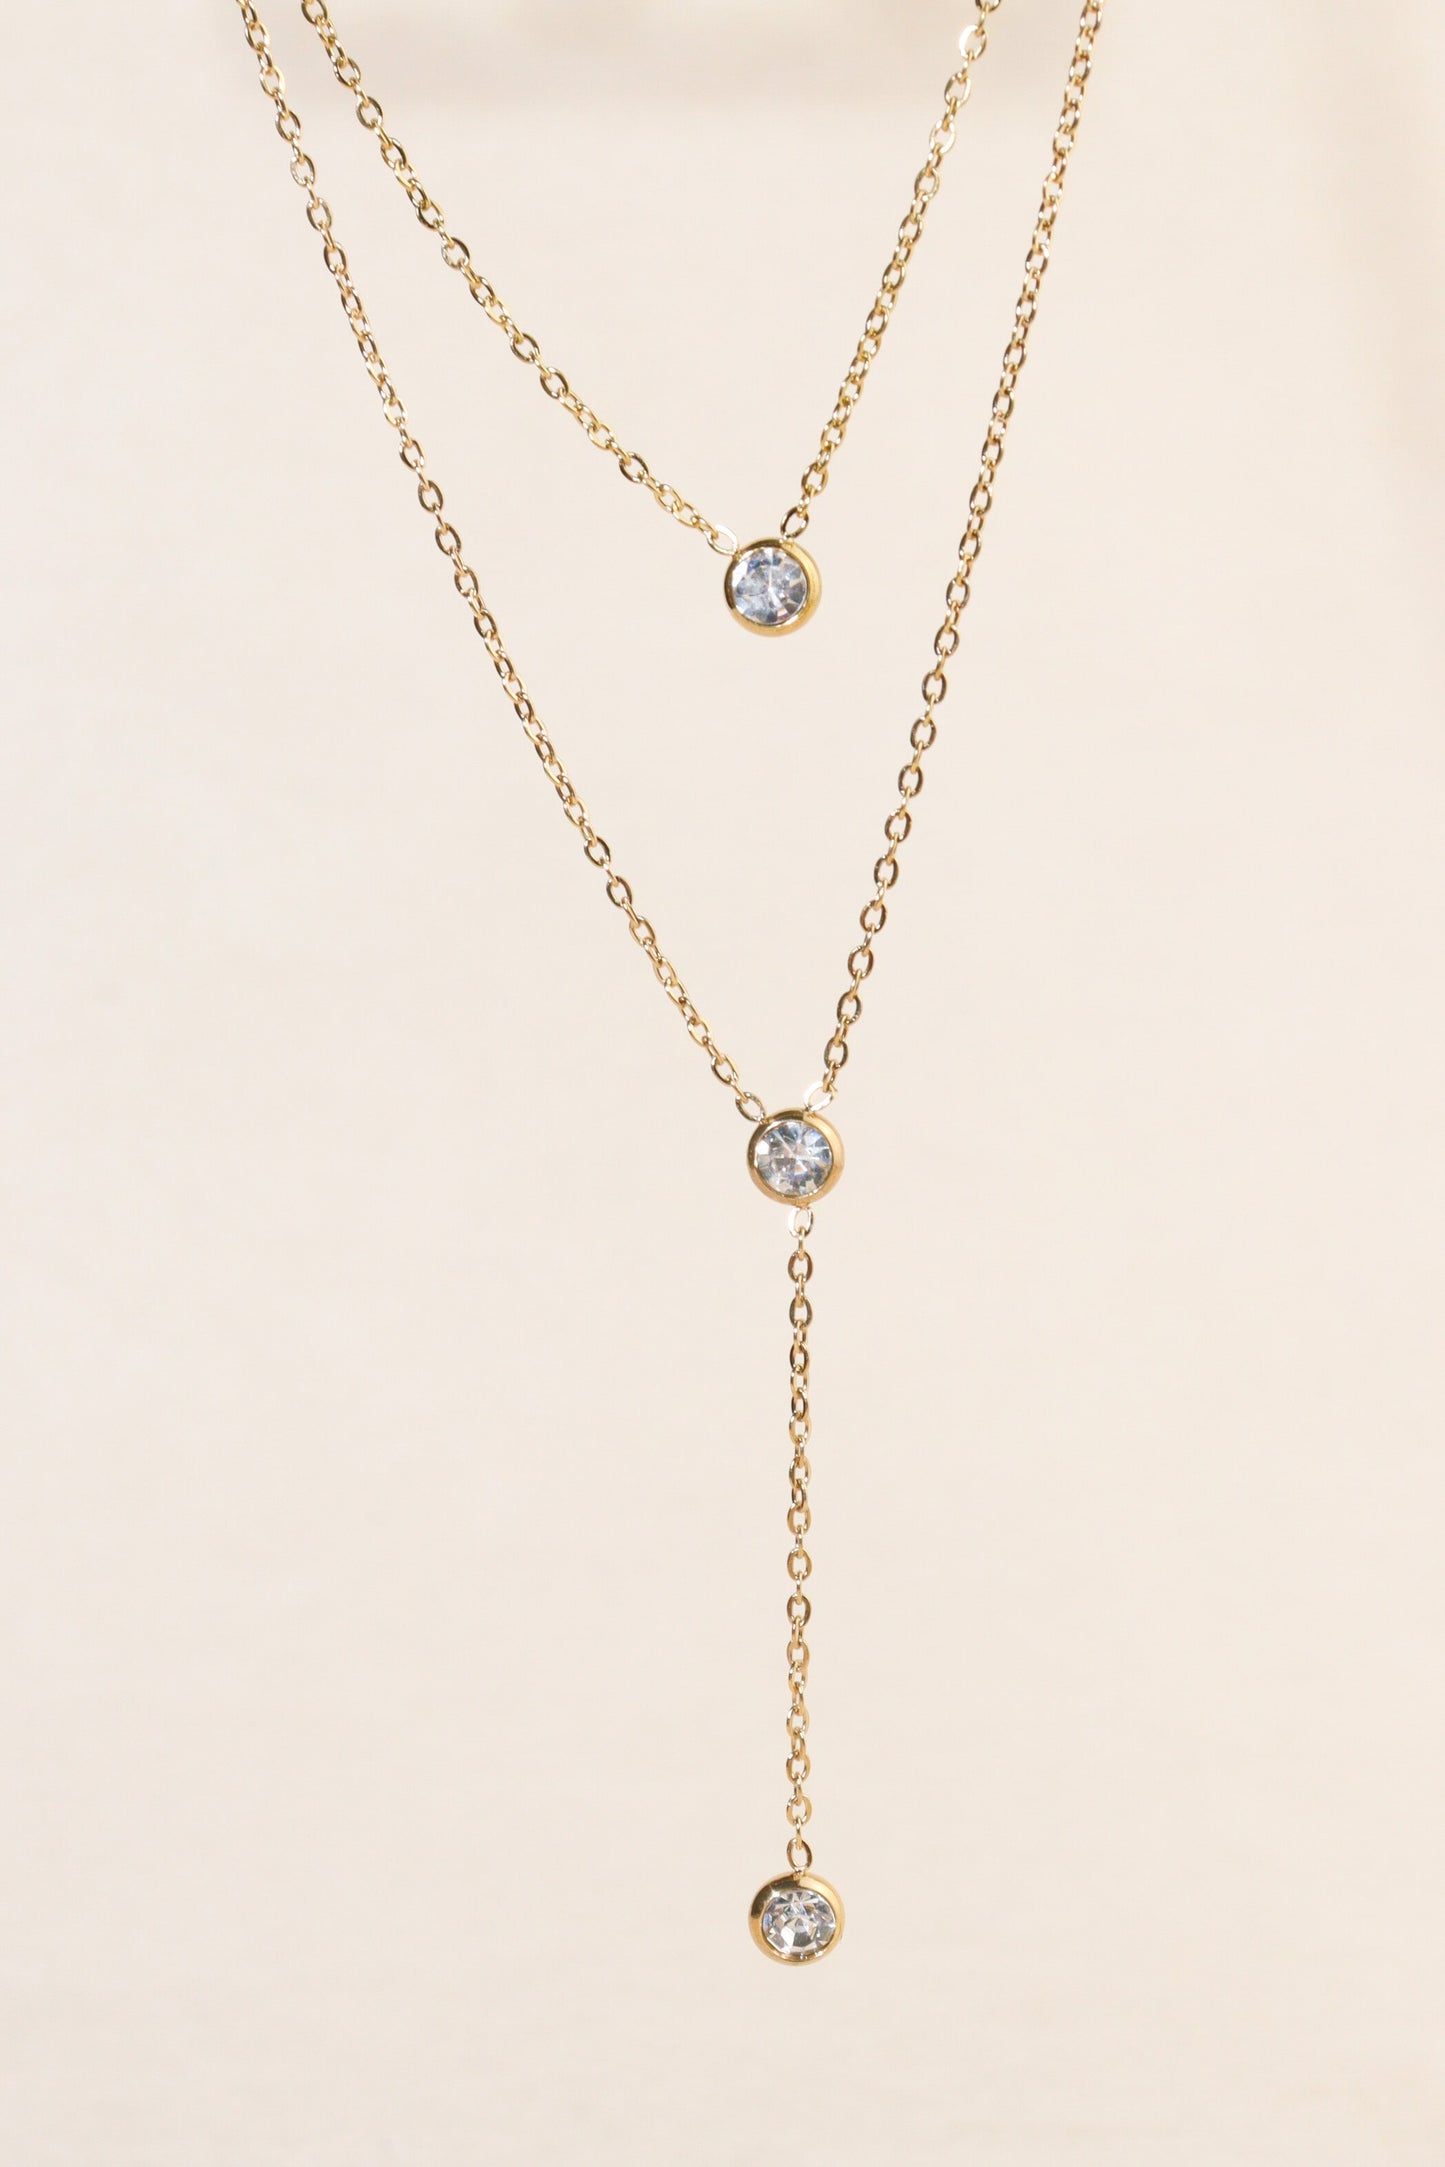 Aphrodite Envy Layered Gold Necklace